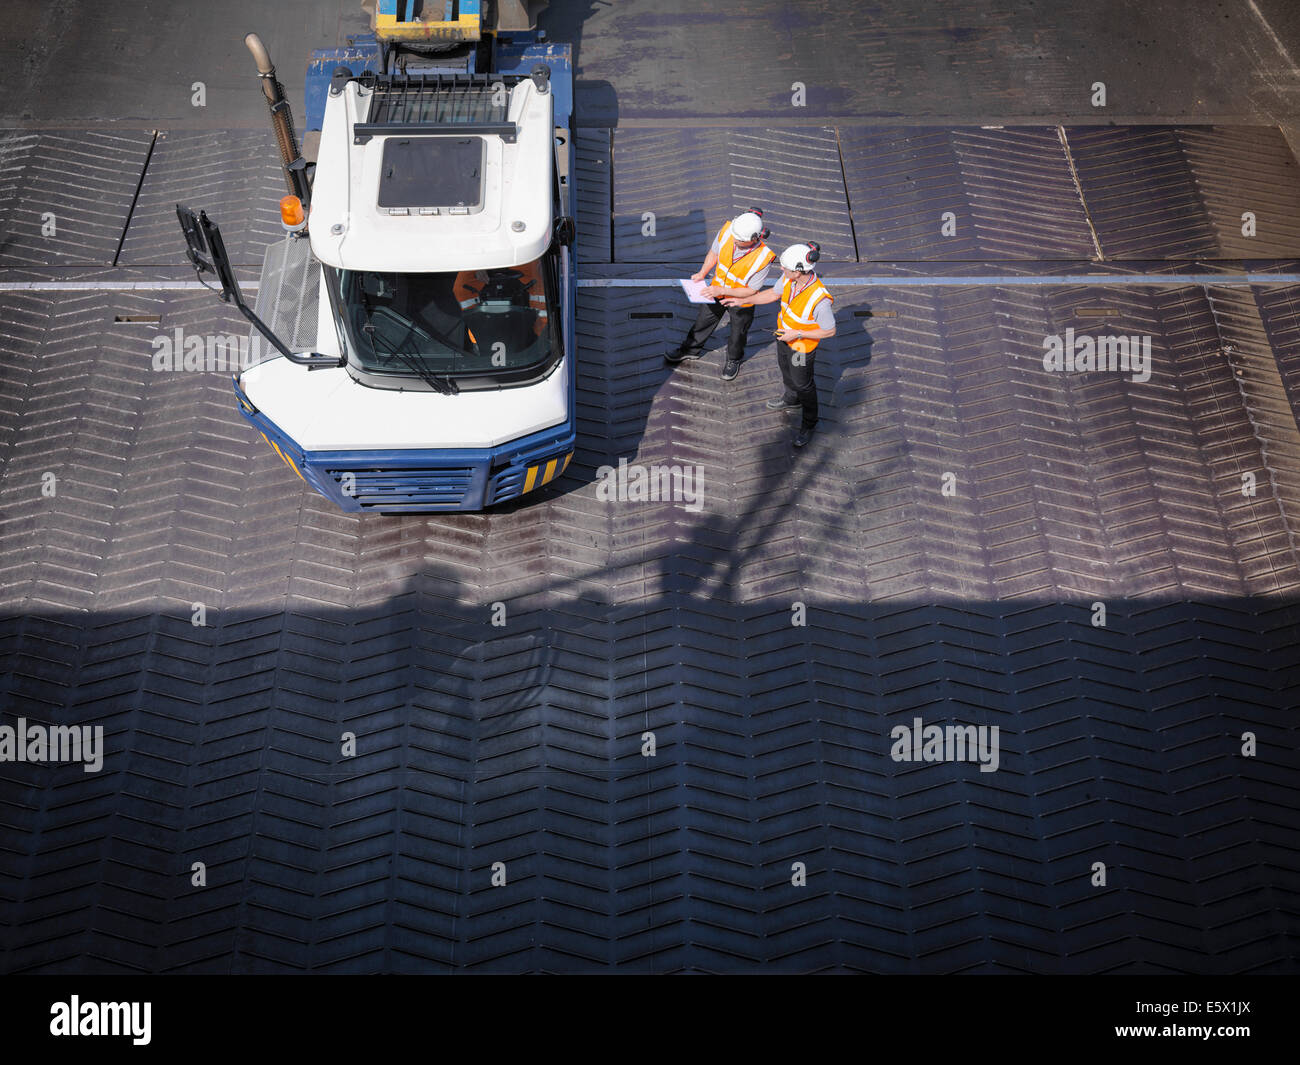 Workers in discussion with truck driver on ship's ramp, elevated view Stock Photo